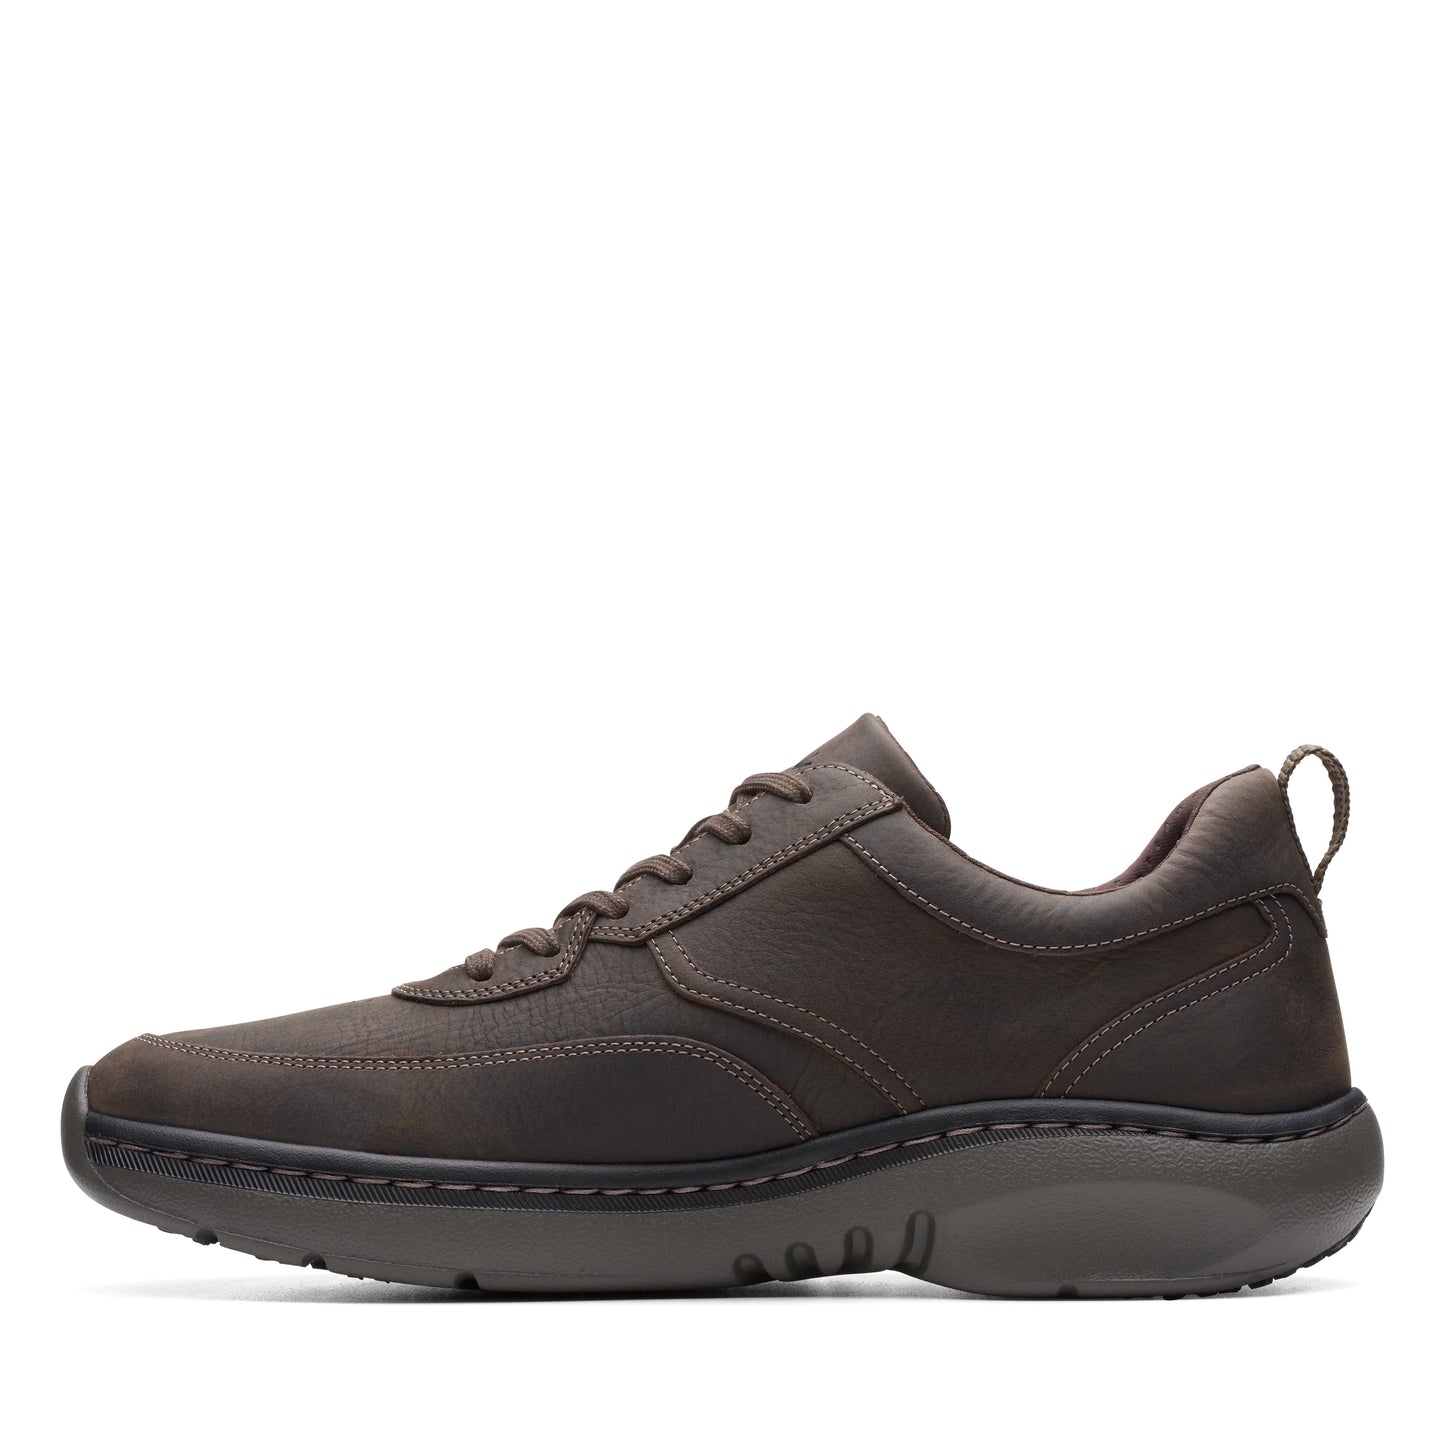 CLARKS | ZAPATOS DERBY HOMBRE | CLARKS PRO LACE DARK BROWN TUMBLED | MARRÓN